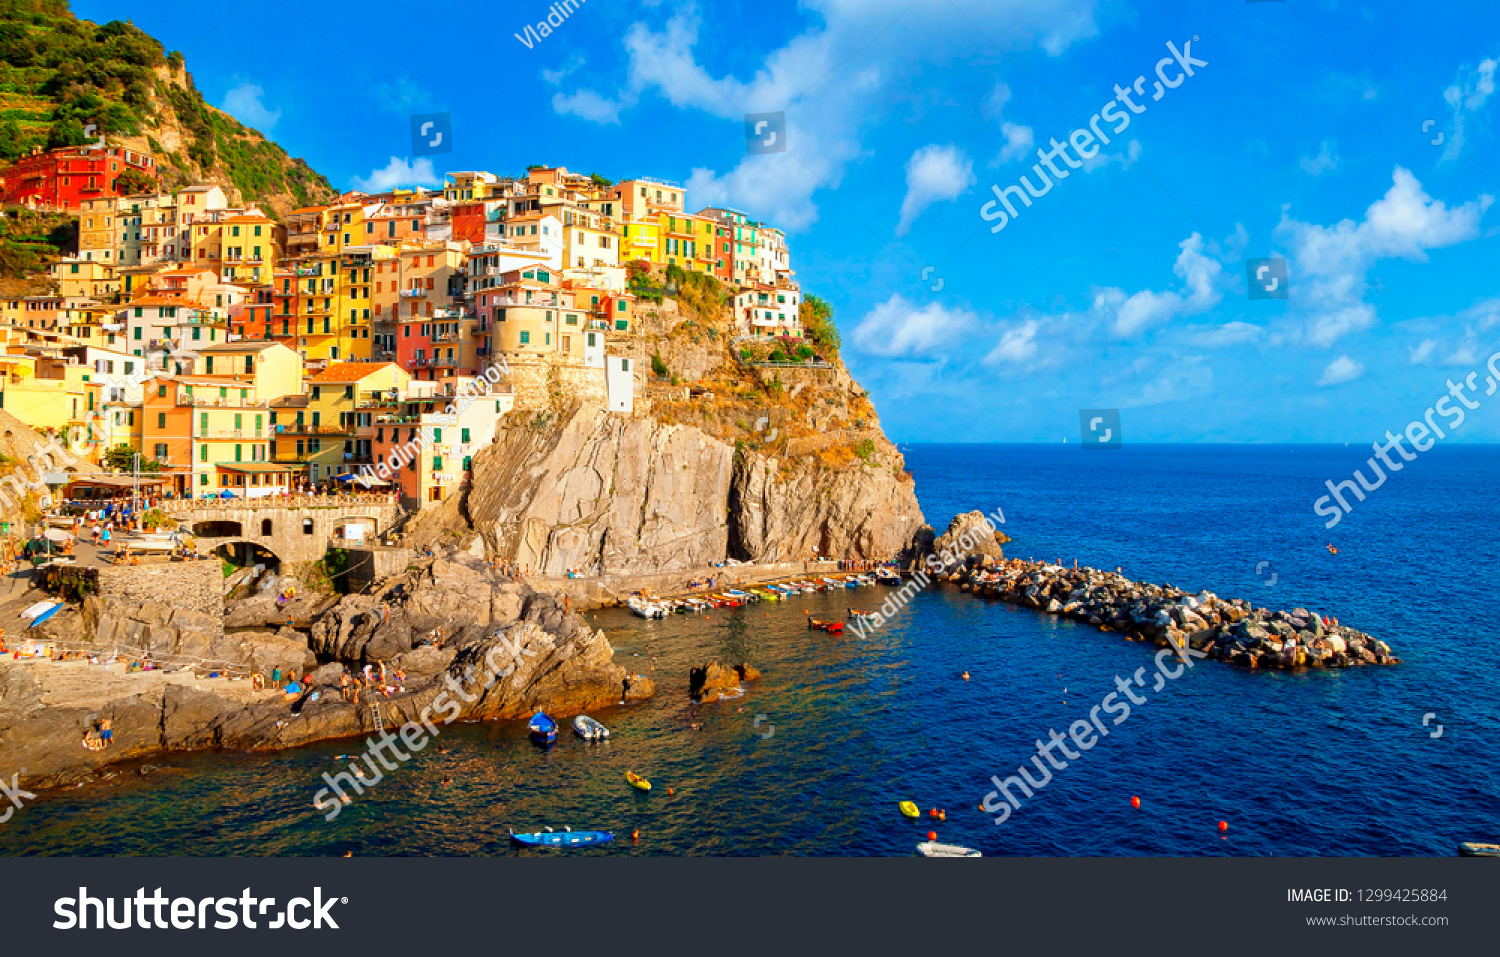 Panaramic view of Manarola, Cinque Terre coast in Italy, Europe. Is one of five famous colorful villages of Cinque Terre National Park in Italy. Architecture and landmark of Manarola and Italy. #1299425884